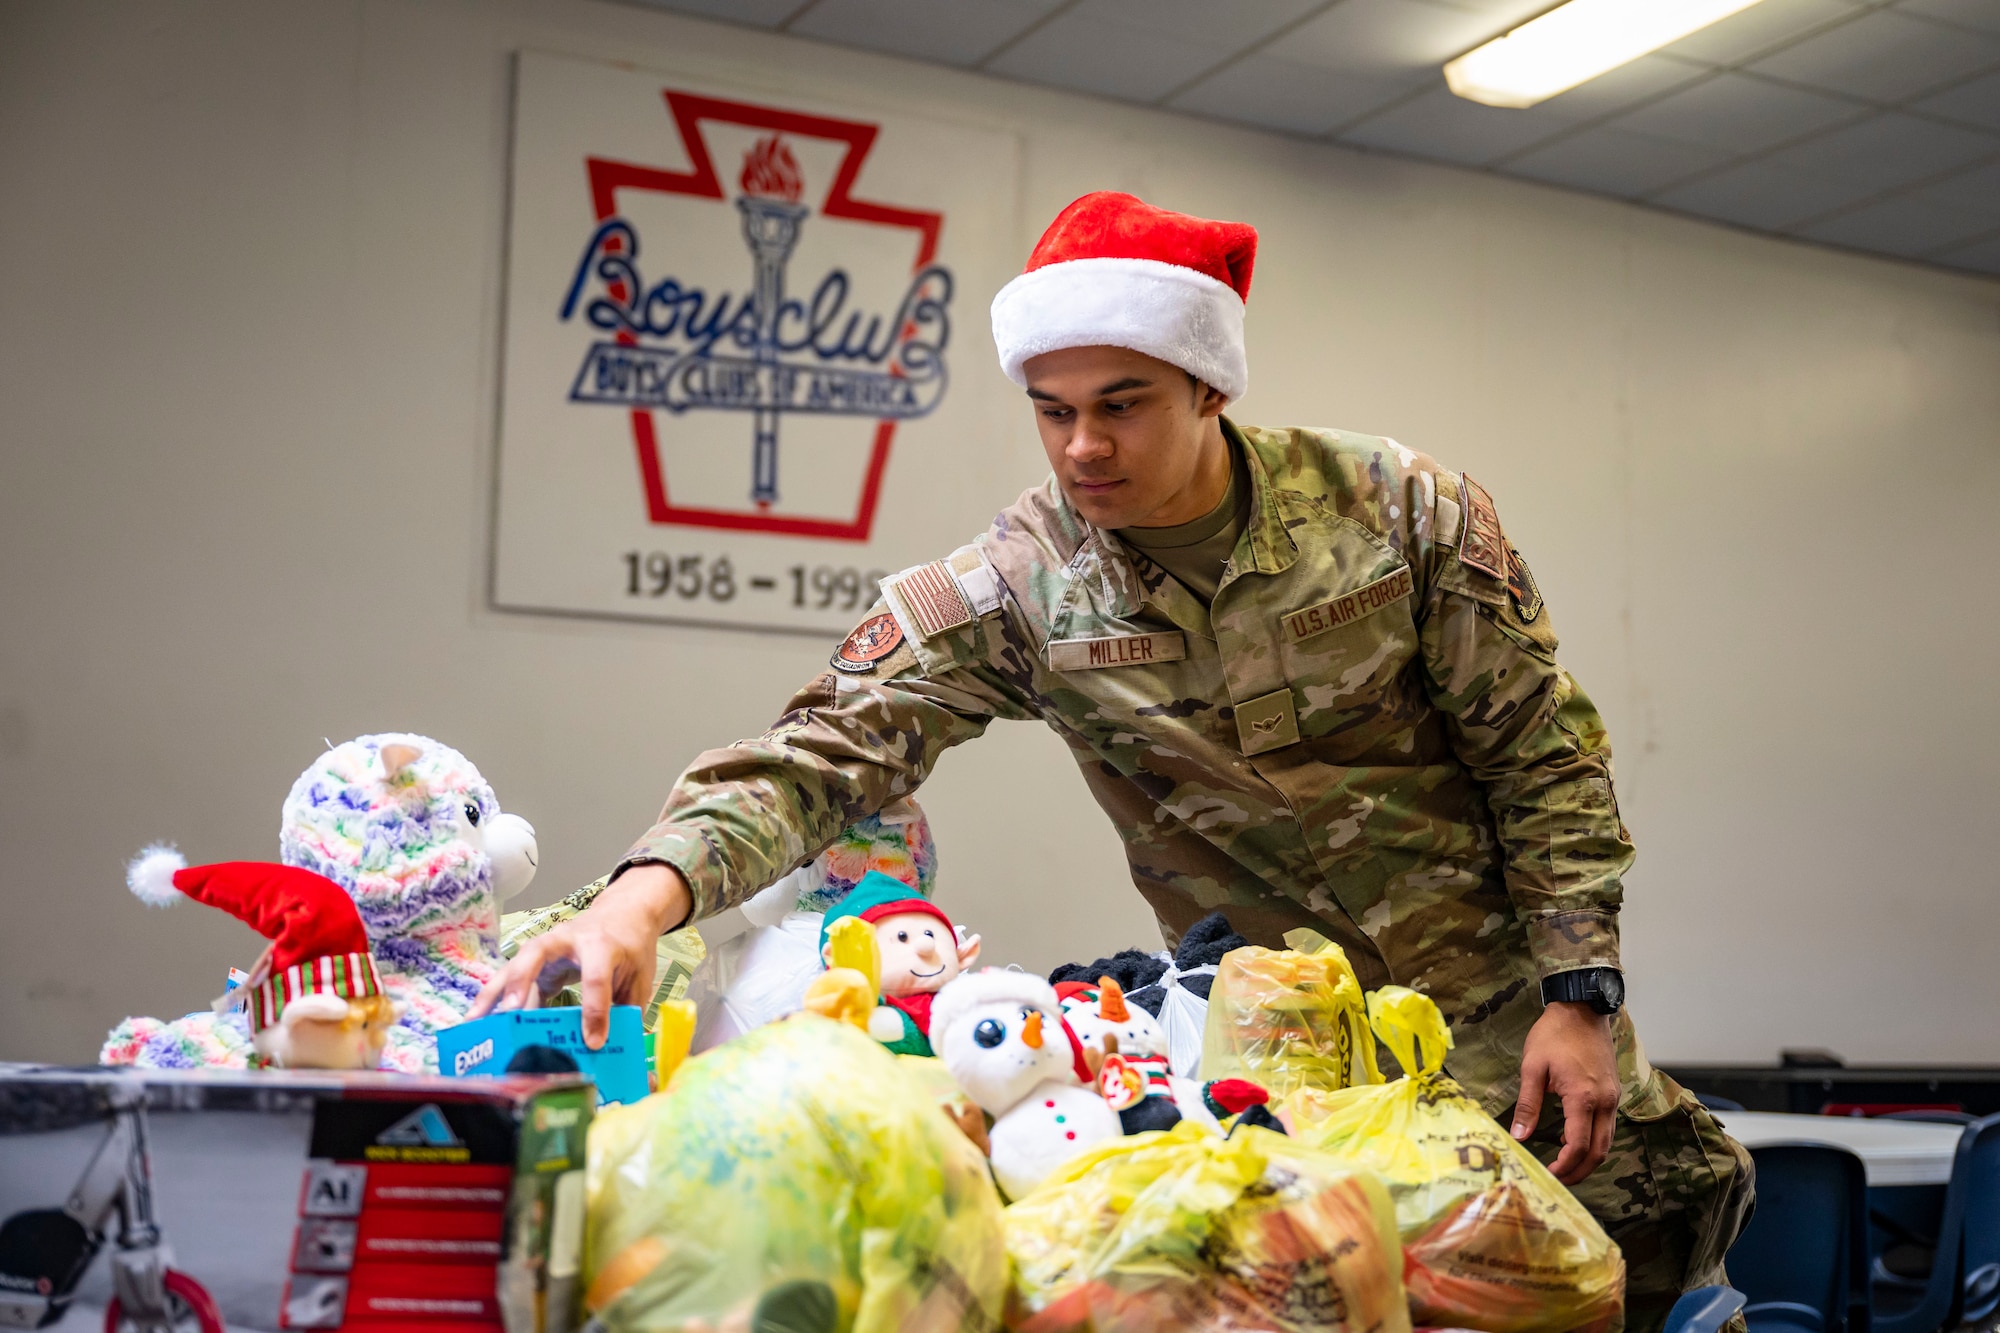 U.S. Air Force Airman Joshua Miller, 77th Weapons Squadron member, places gifts in a donation pile at the Boys and Girls Club of Abilene in Abilene, Texas, Dec. 14, 2022. The RAD team carried bags of toys during the six-mile ruck march to the Boys and Girls Club of Abilene to donate them to those in need. (U.S. Air Force photo by Senior Airman Leon Redfern)